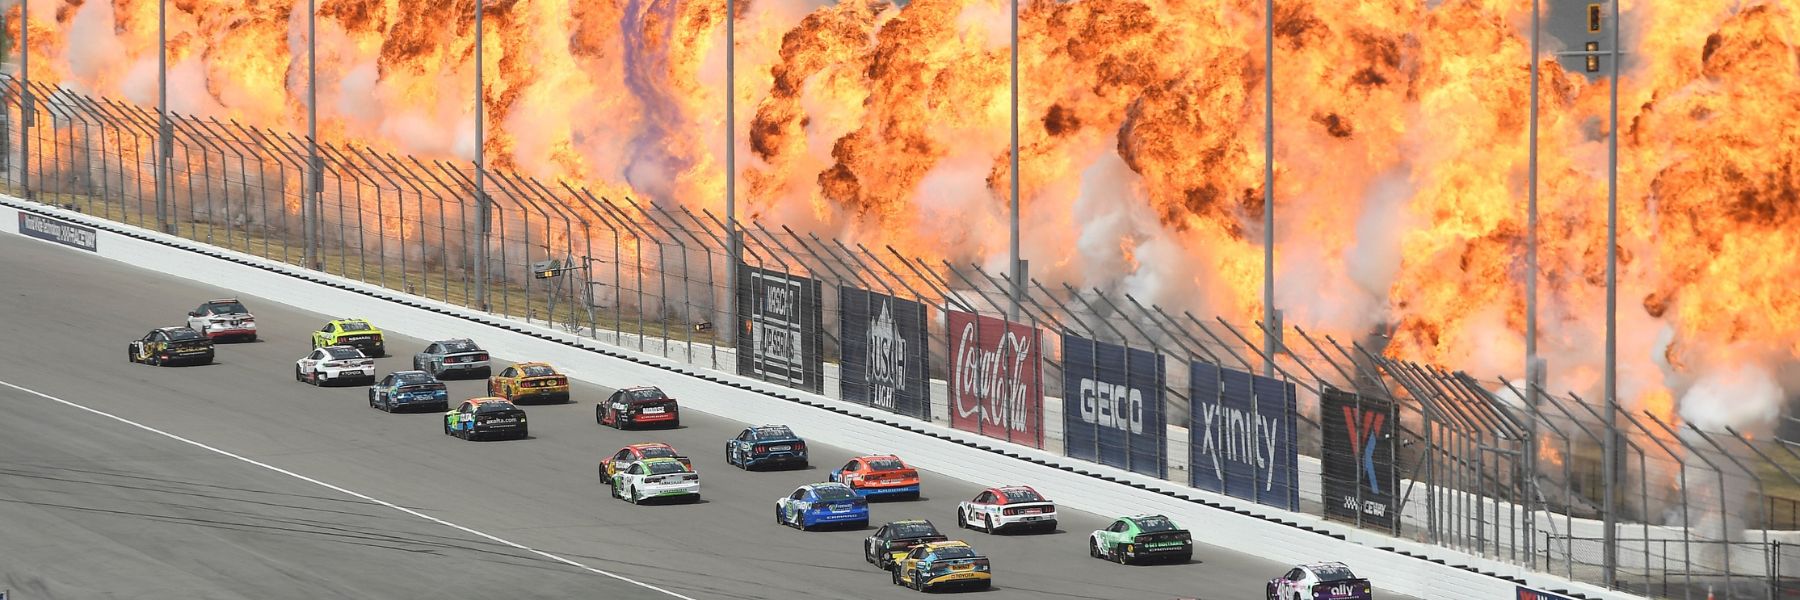 During the NASCAR Cup Series race in St. Louis, flames ignite around the track.